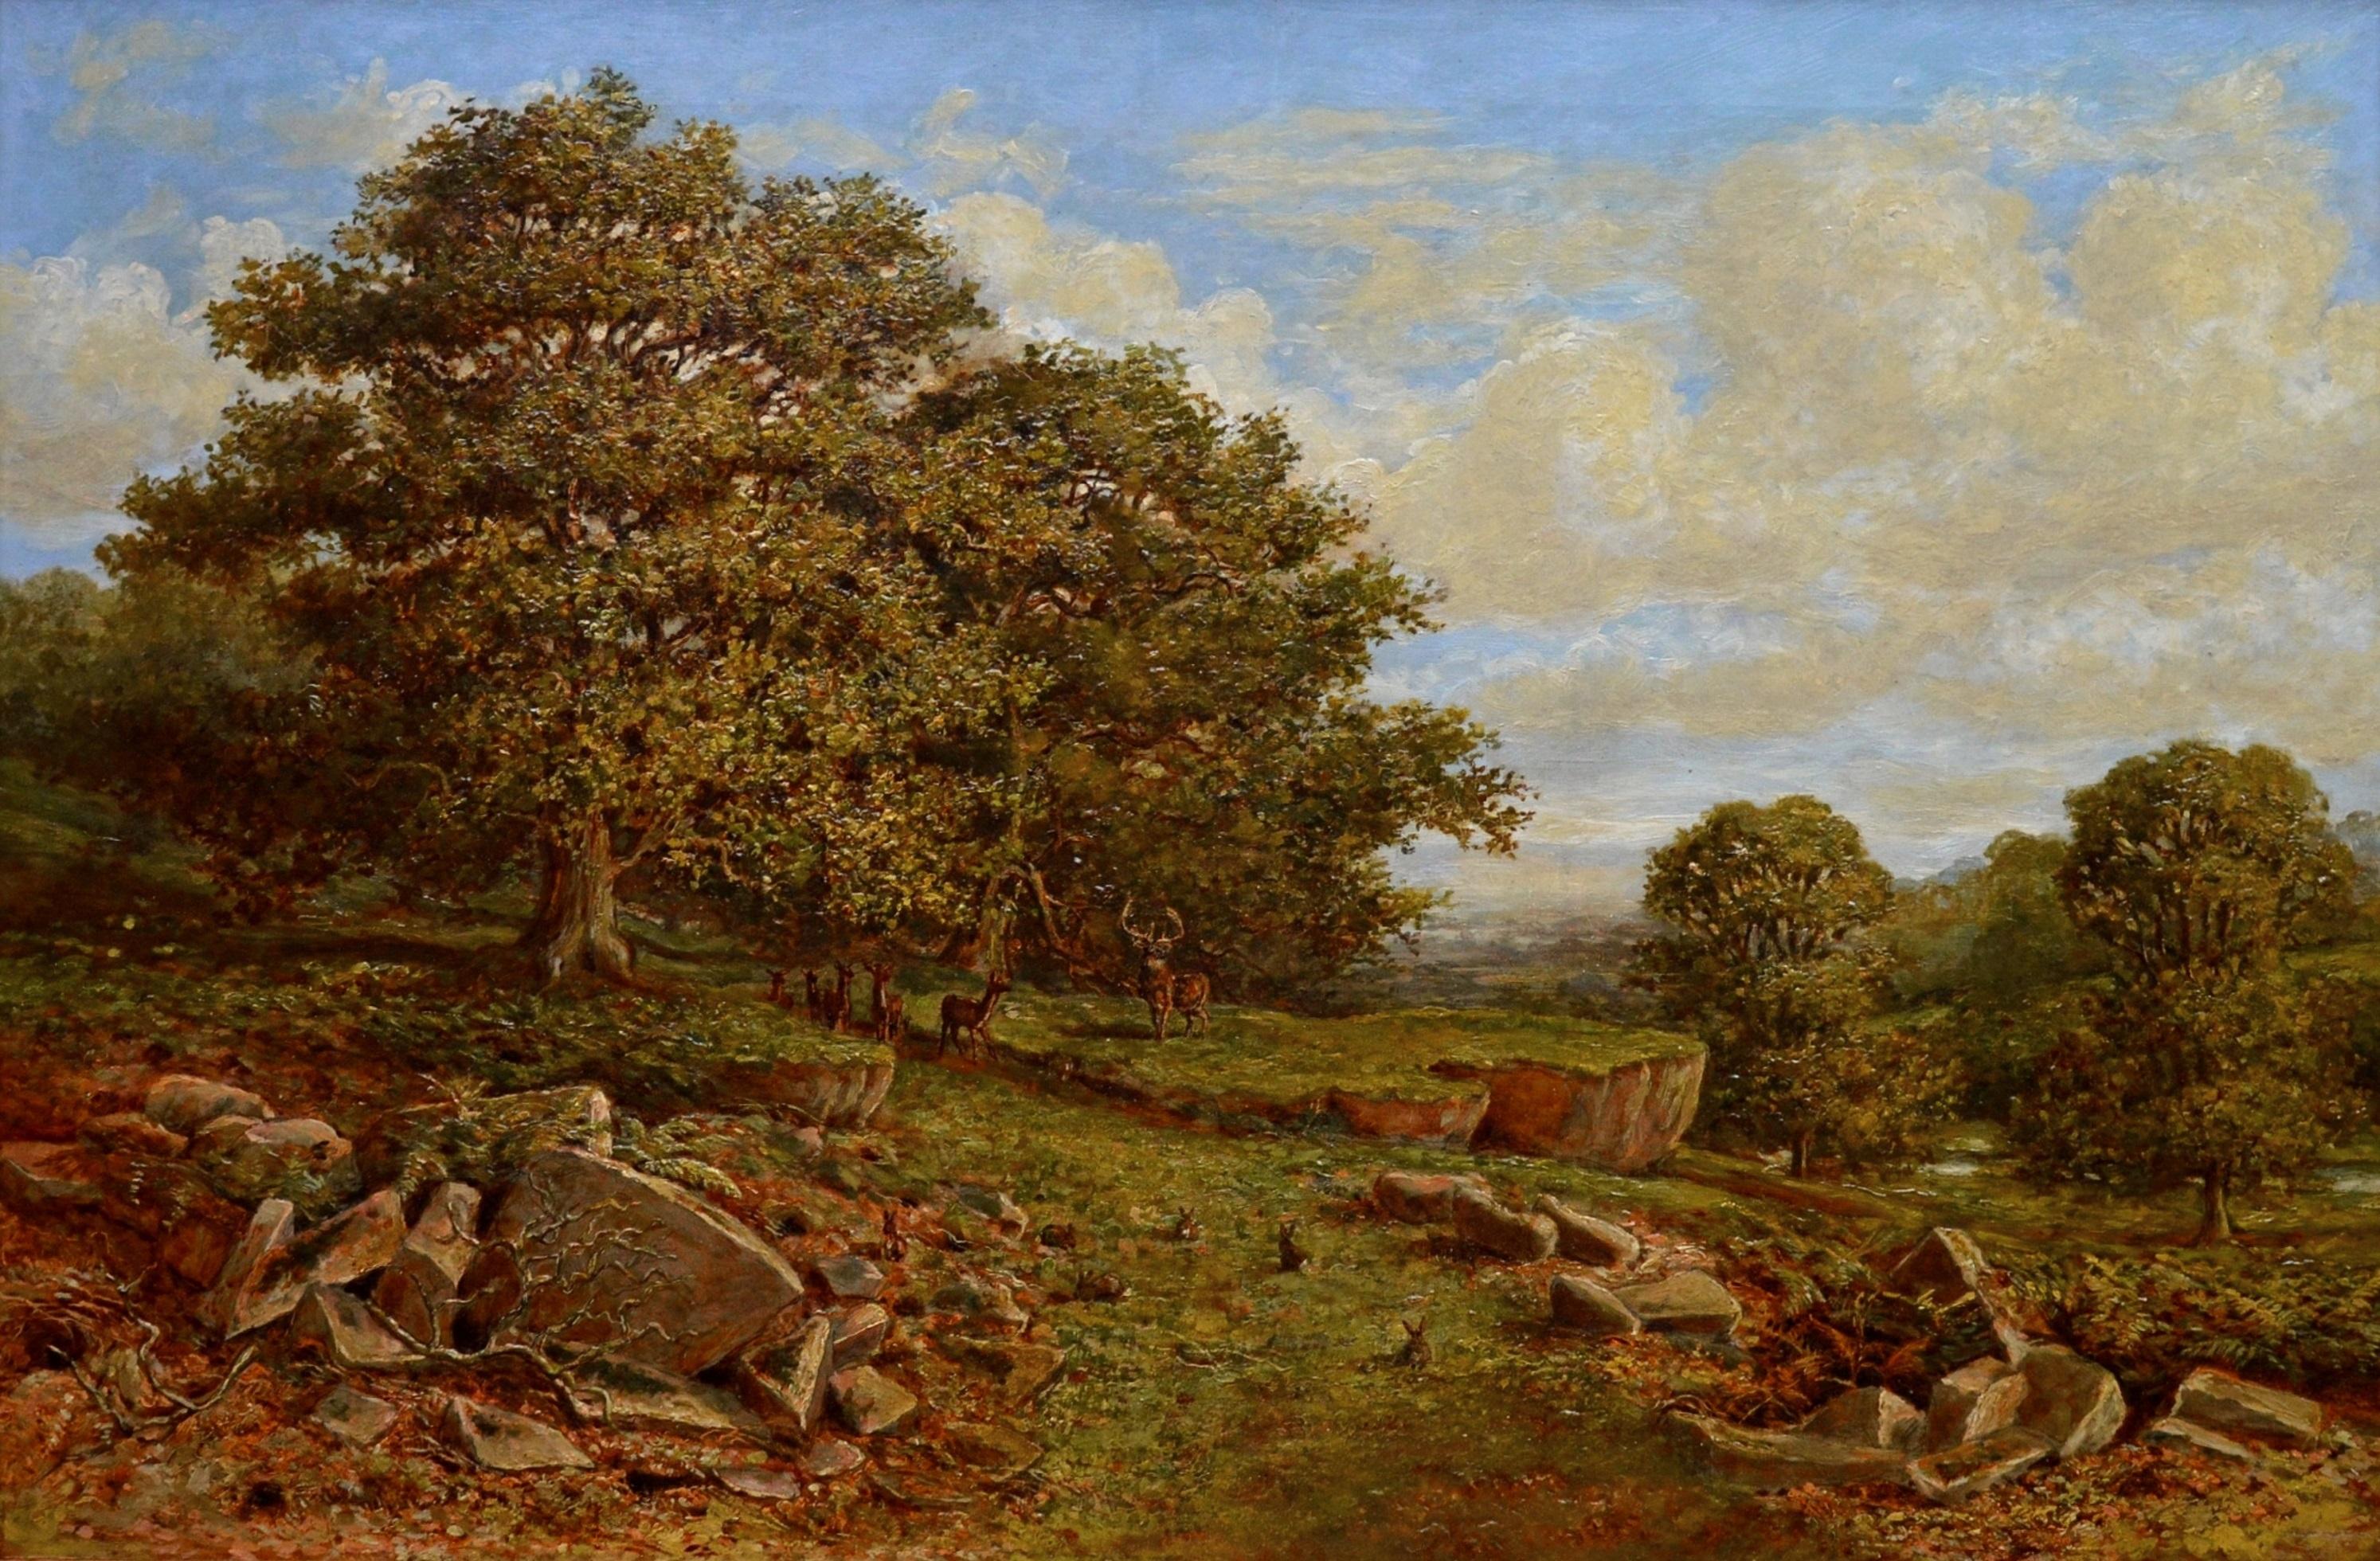 This is a fine large 19th century oil on canvas depicting family of dear and rabbits in an extensive English woodland landscape of ‘Bradgate Park, Leicestershire’ by the eminent Victorian painter Edward Davies (1843-1912). This was the very first